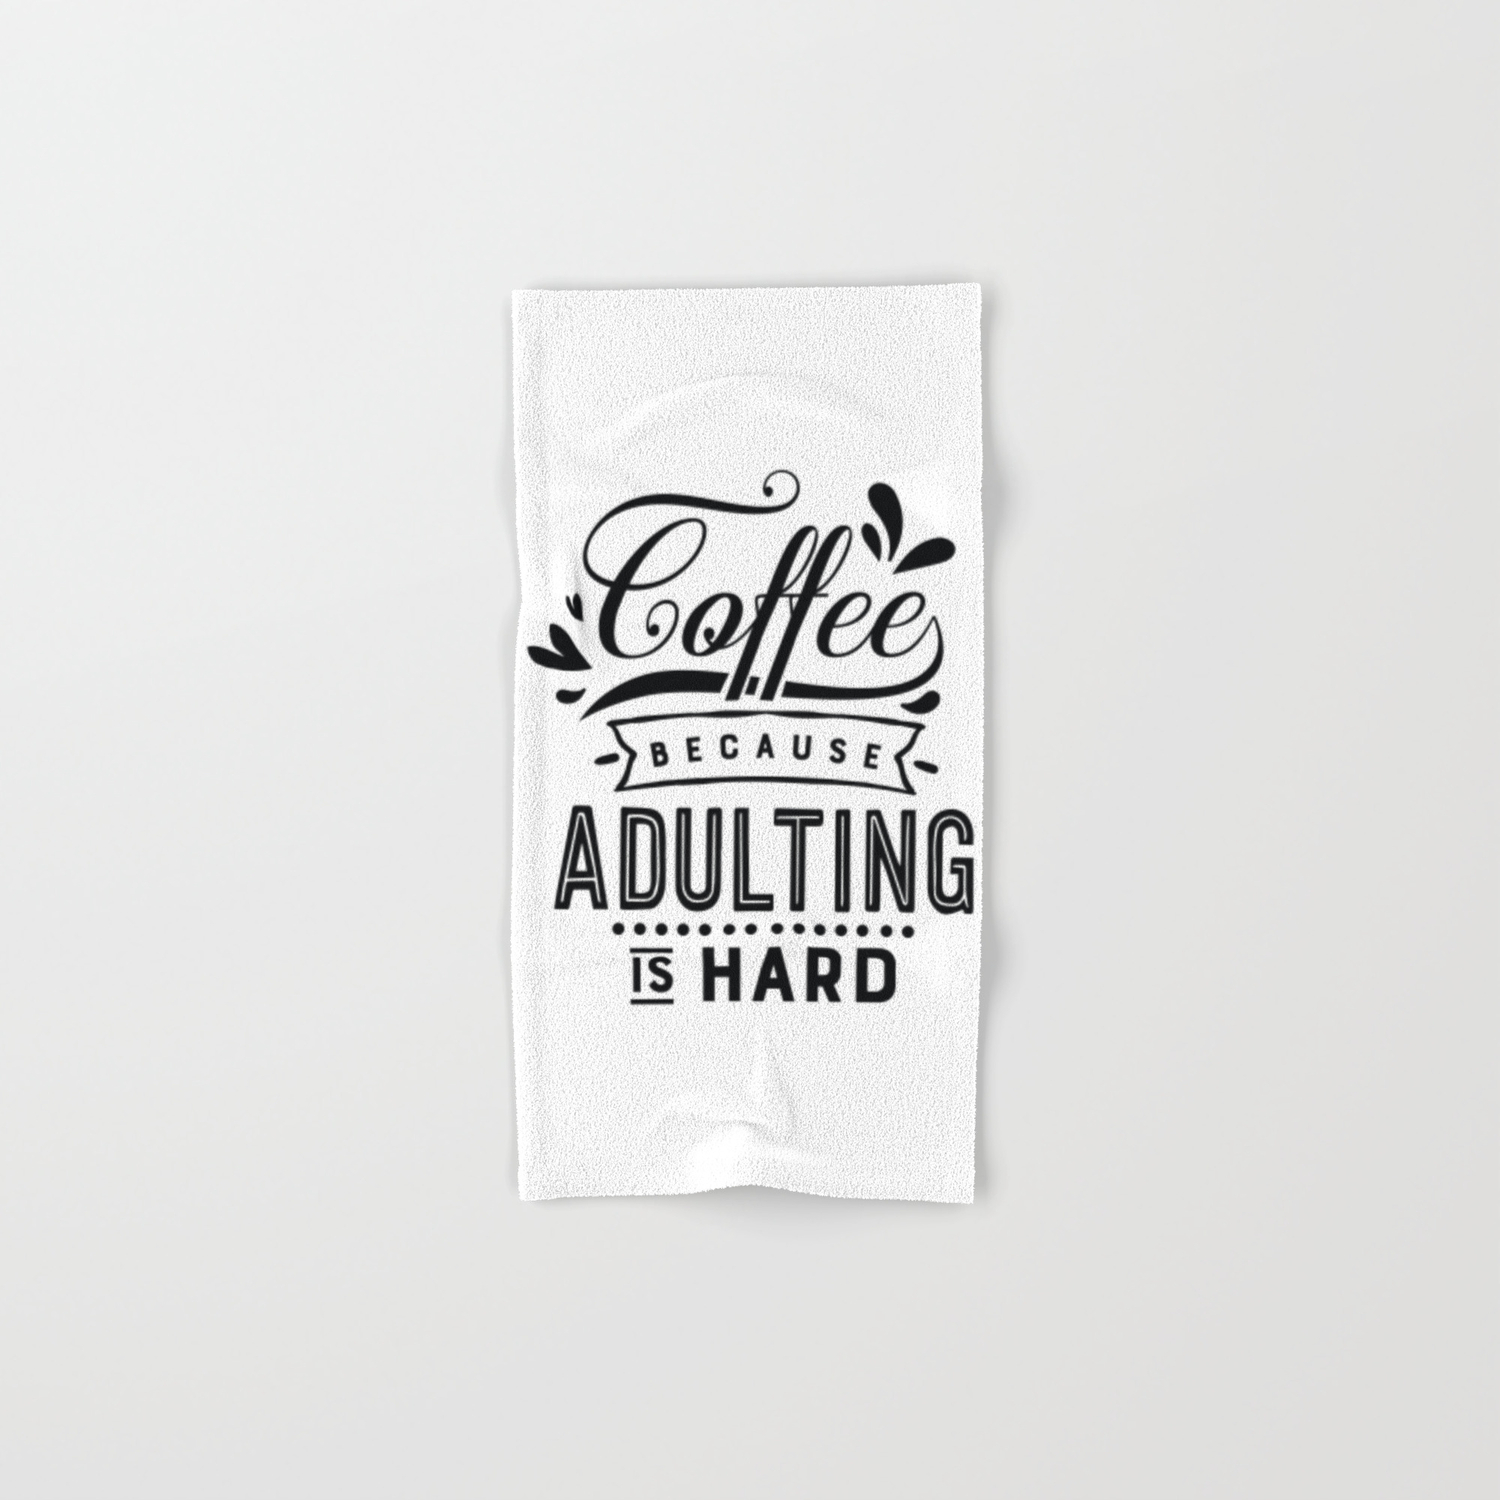 Coffee because adulting is hard - Funny hand drawn quotes illustration.  Funny humor. Life sayings. Hand & Bath Towel by The Life Quotes | Society6